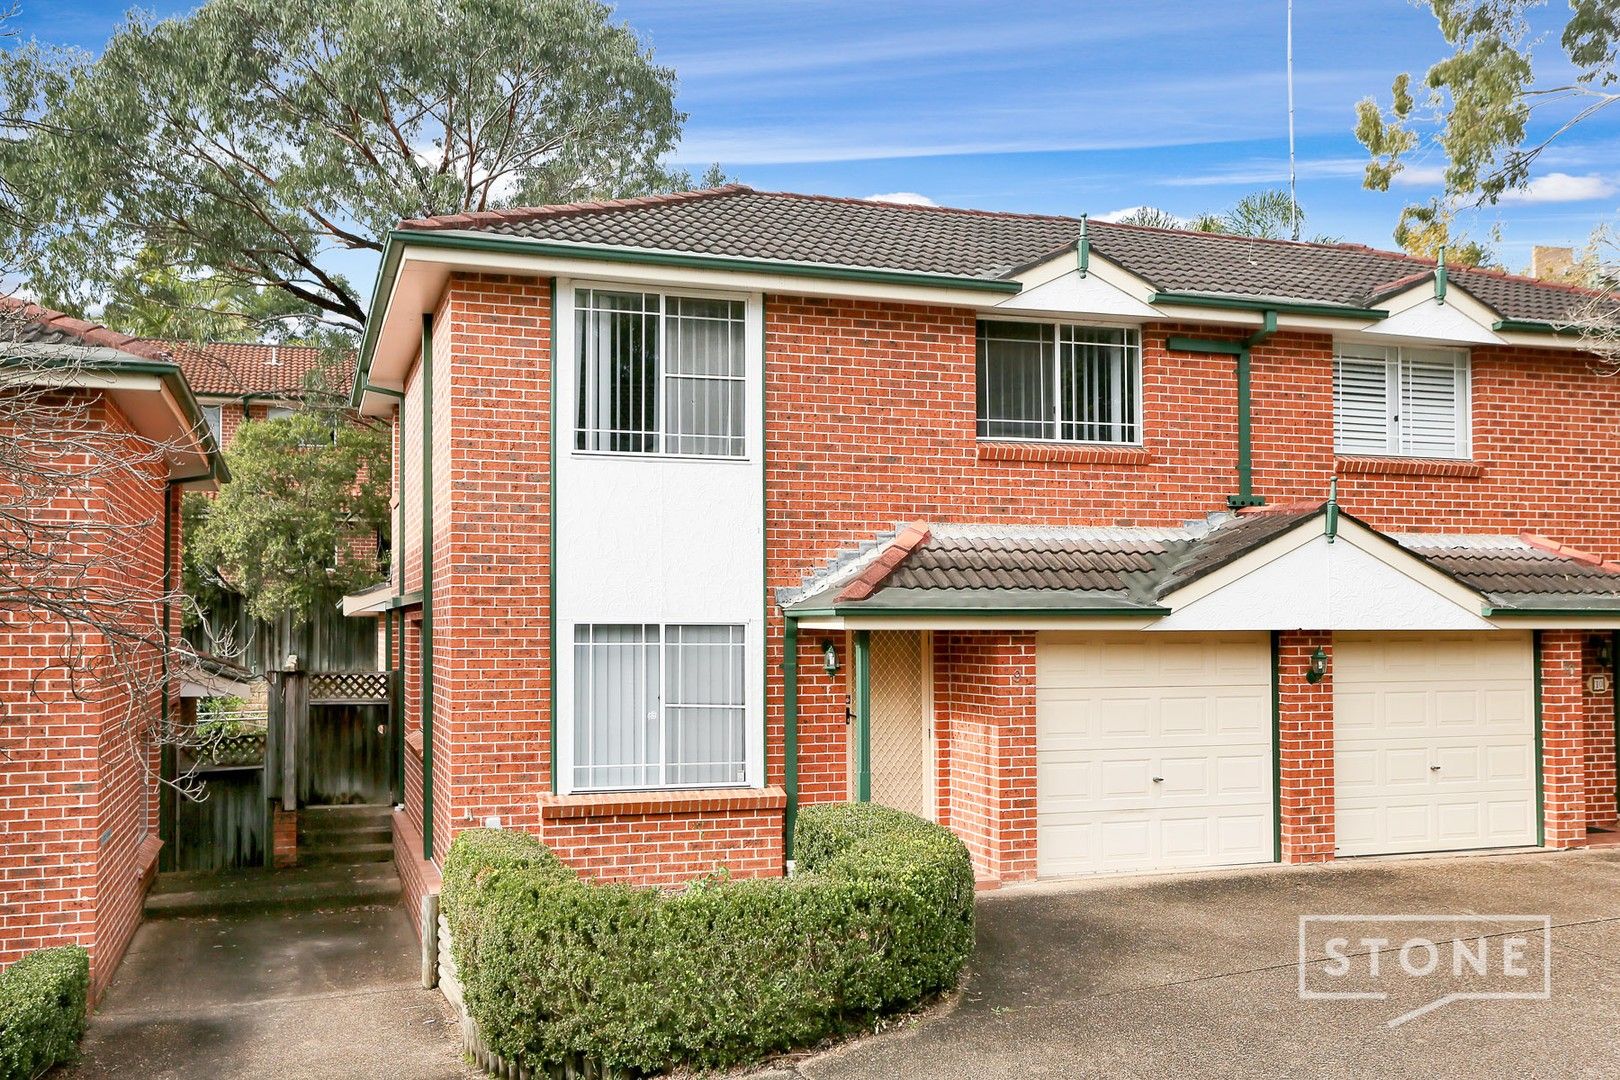 2 bedrooms Townhouse in 9/22-26 Cecil Avenue CASTLE HILL NSW, 2154